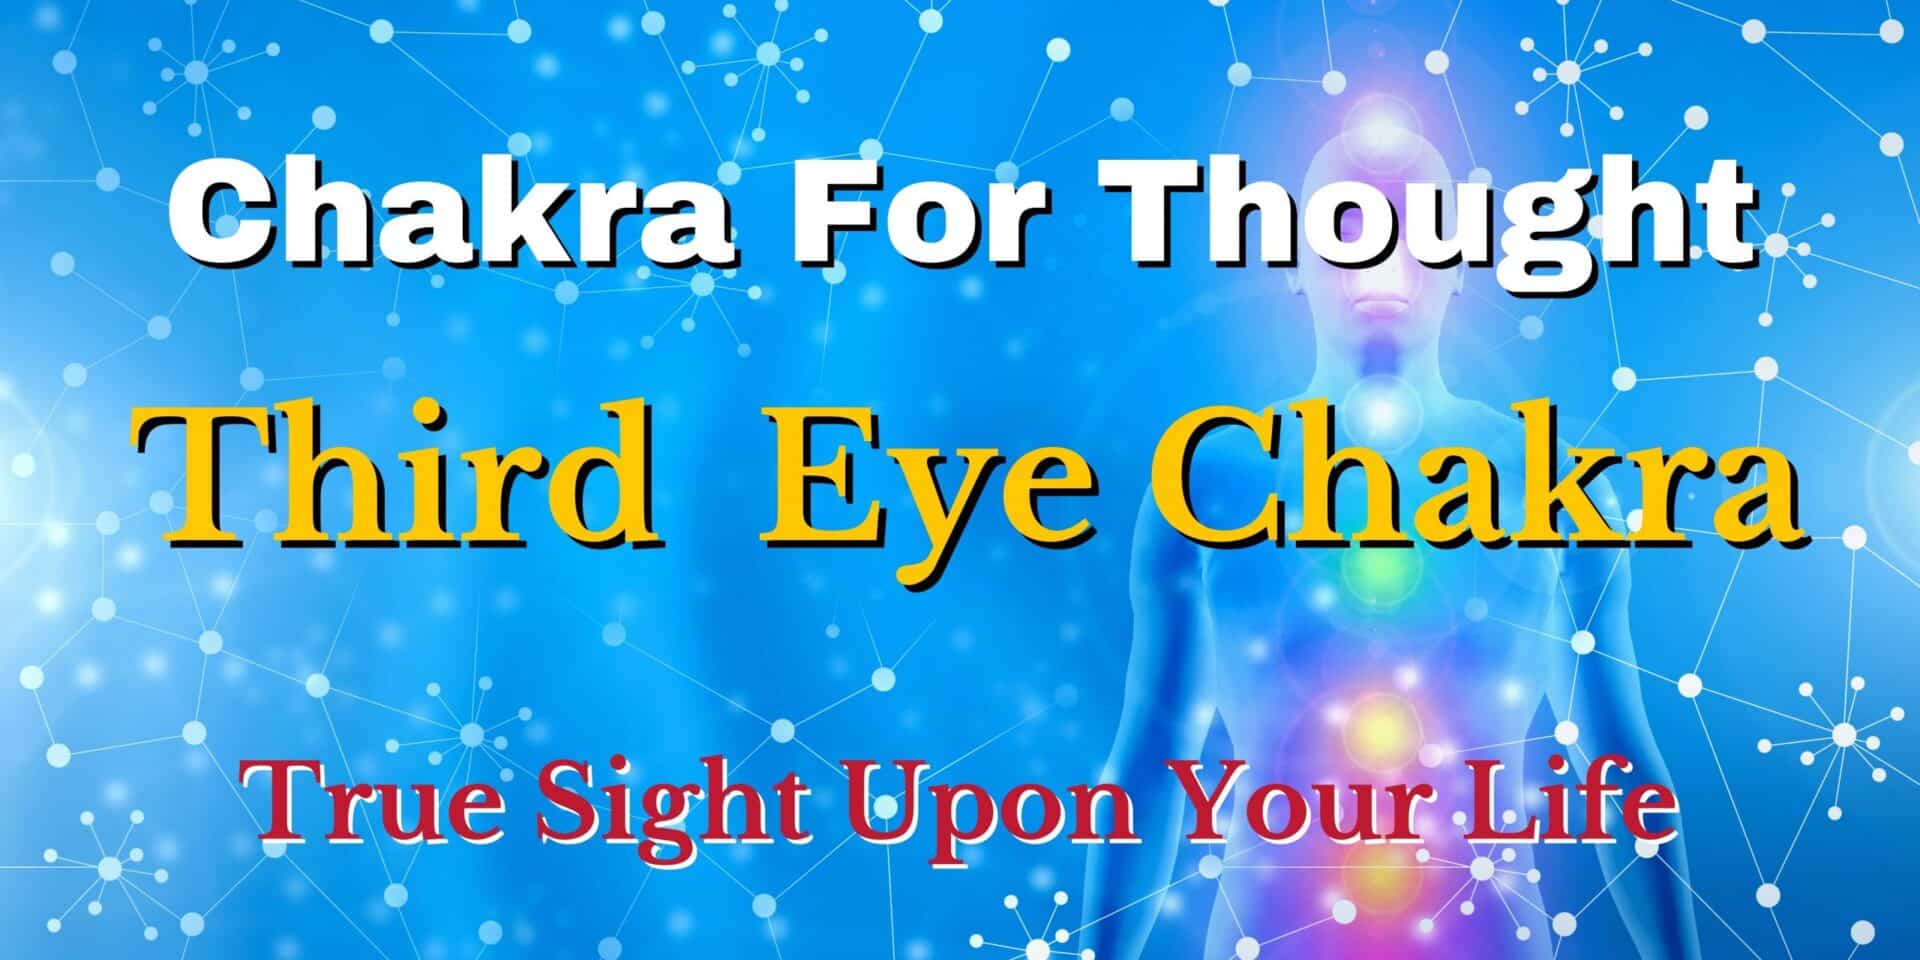 chakra for thought : third eye chakra - spiritual meanings